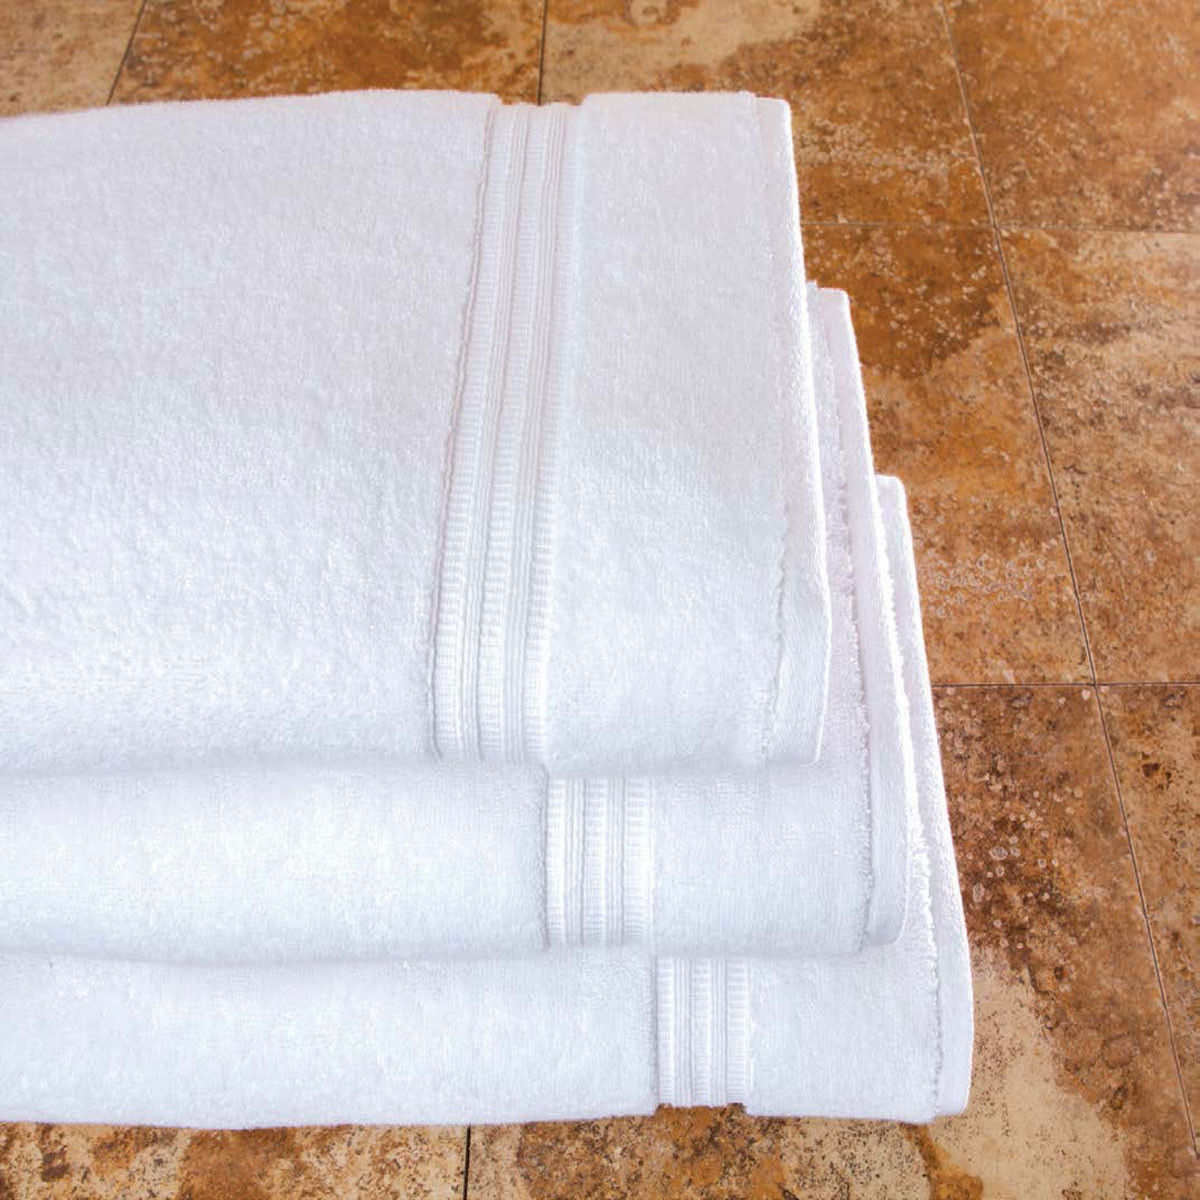 Where is the hotel villa borghese lucca towel collection made?